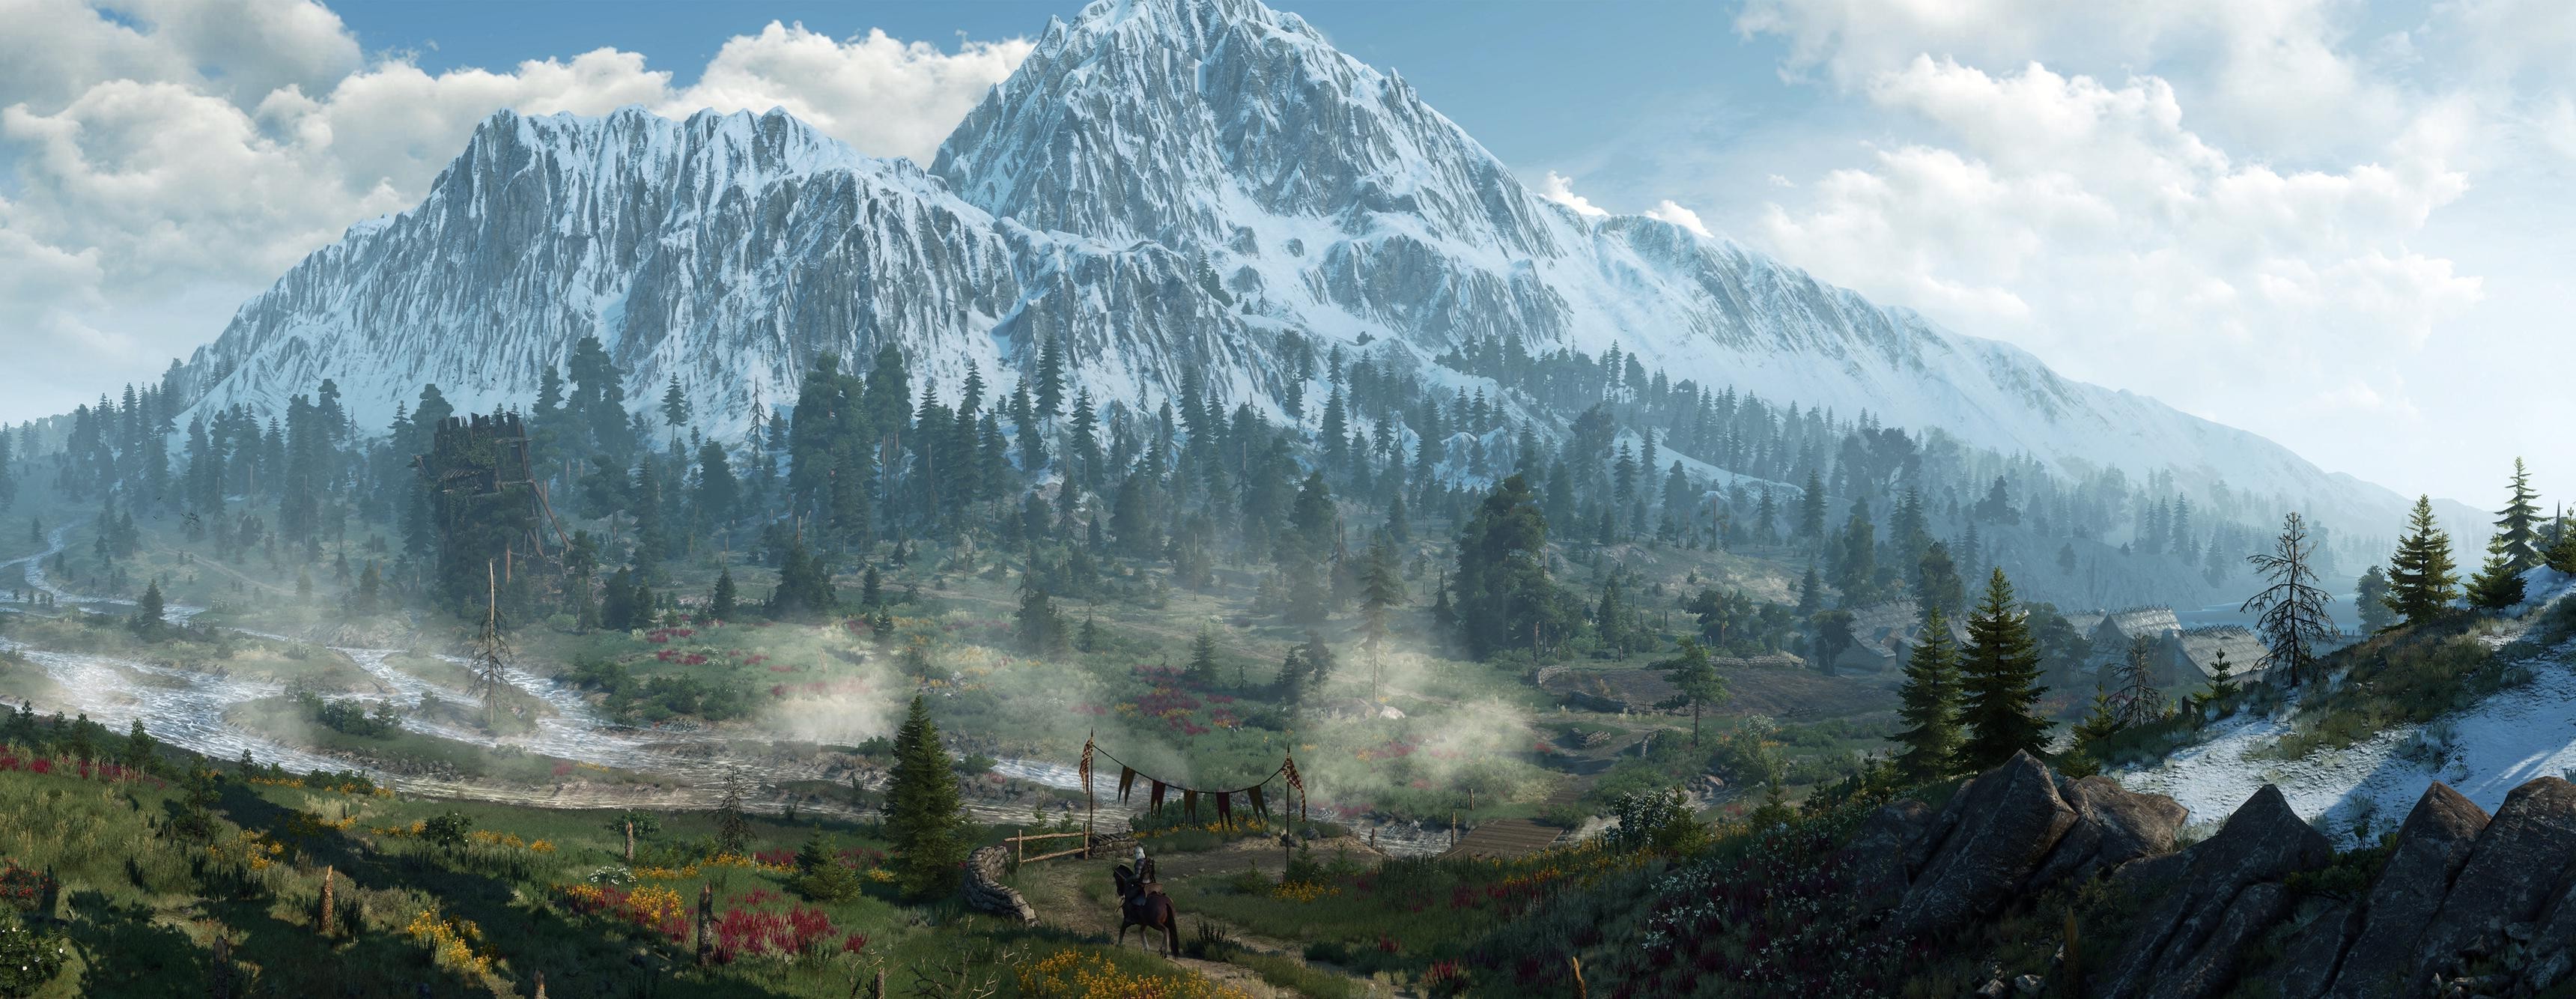 ultrawide, Landscape, Nature, Photography, The Witcher, The Witcher 3: Wild Hunt Wallpaper